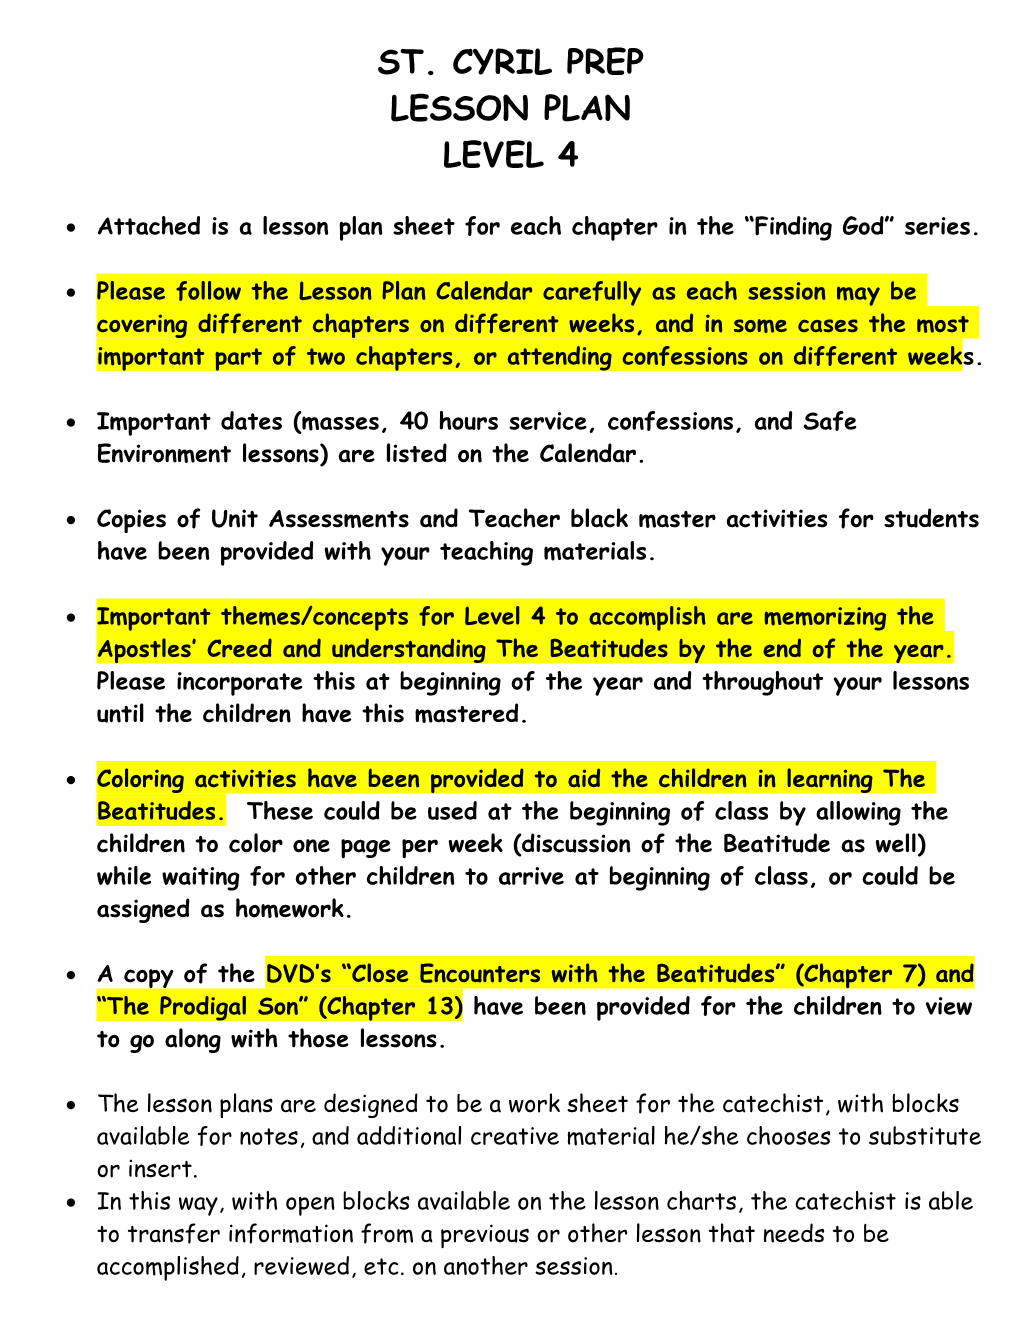 Attached Is a Lesson Plan Sheet for Each Chapter in the Finding God Series